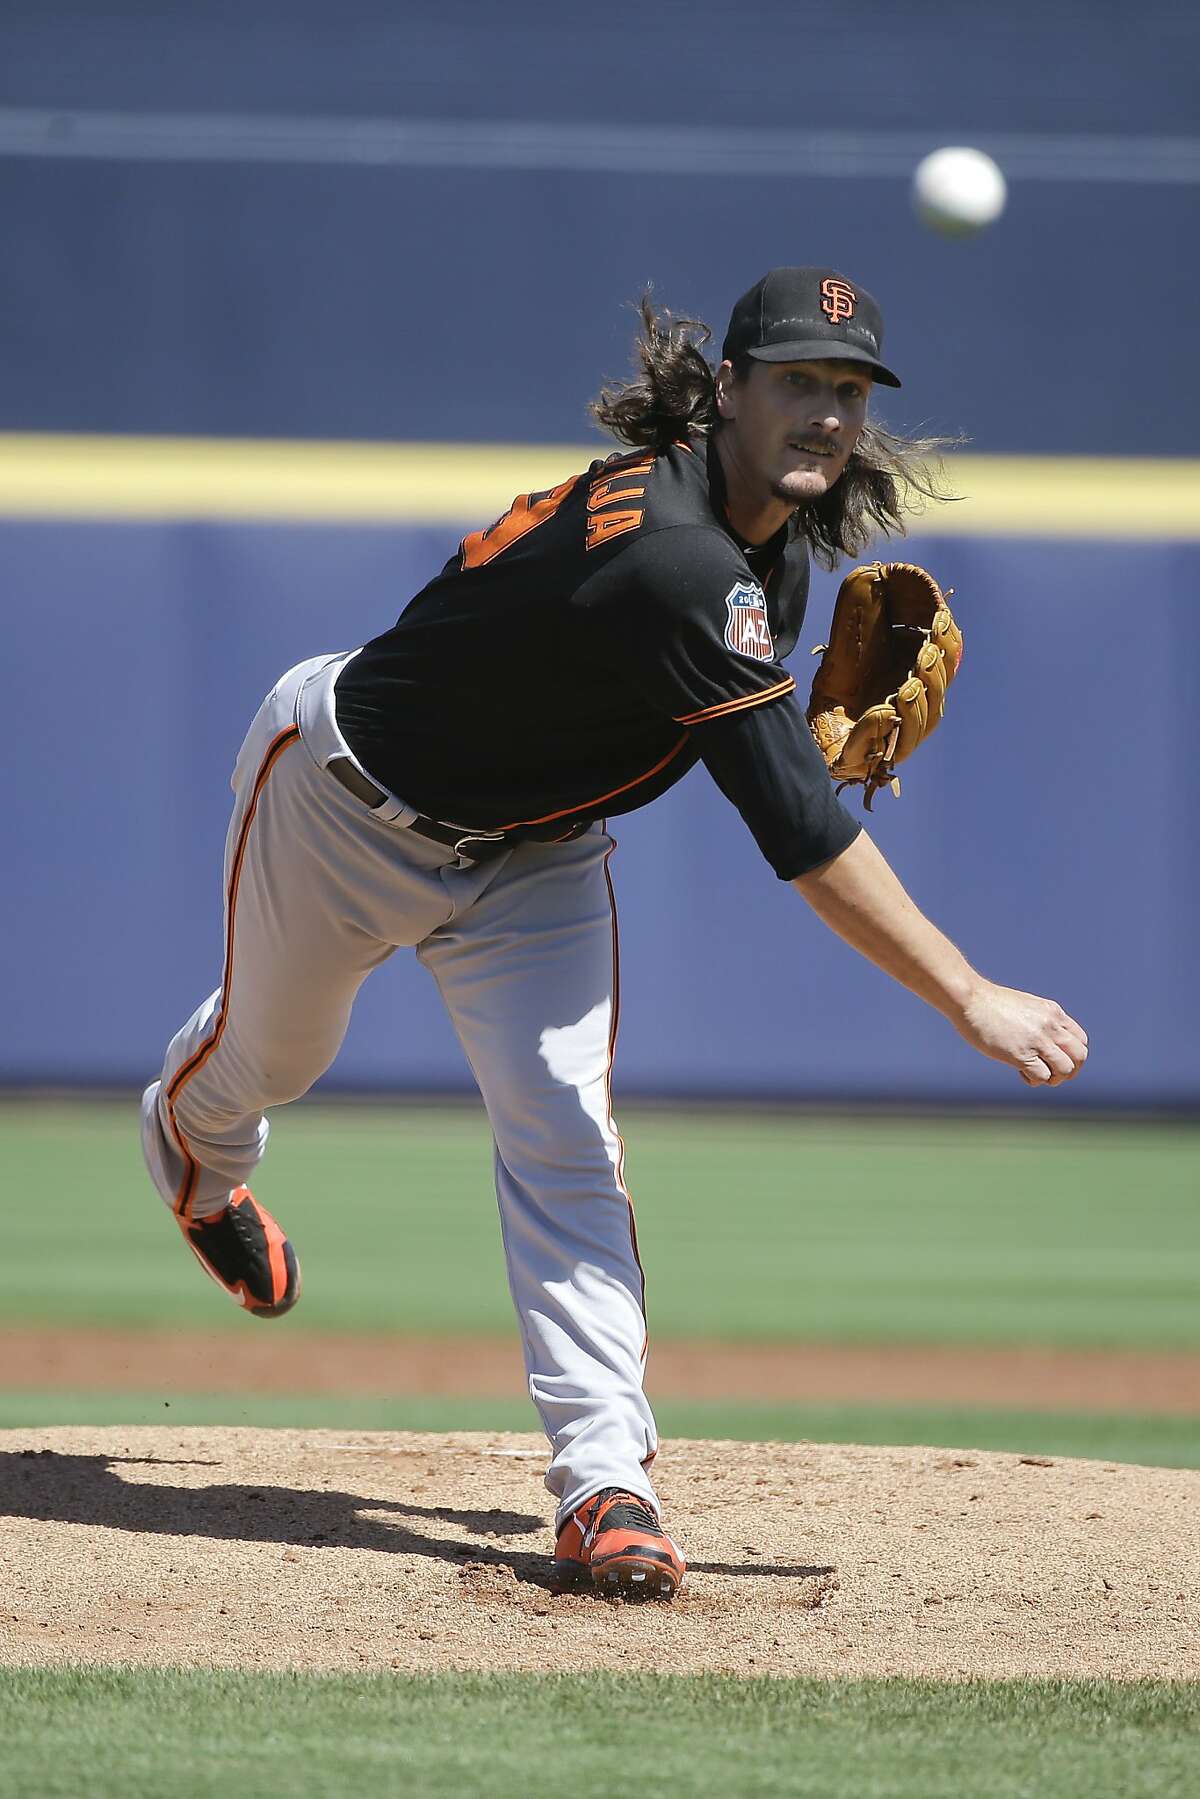 San Francisco Giants starting pitcher Jeff Samardzija throws against the Seattle Mariners during the first inning of a spring training baseball game Wednesday, March 16, 2016, in Peoria, Ariz. (AP Photo/Jae C. Hong)